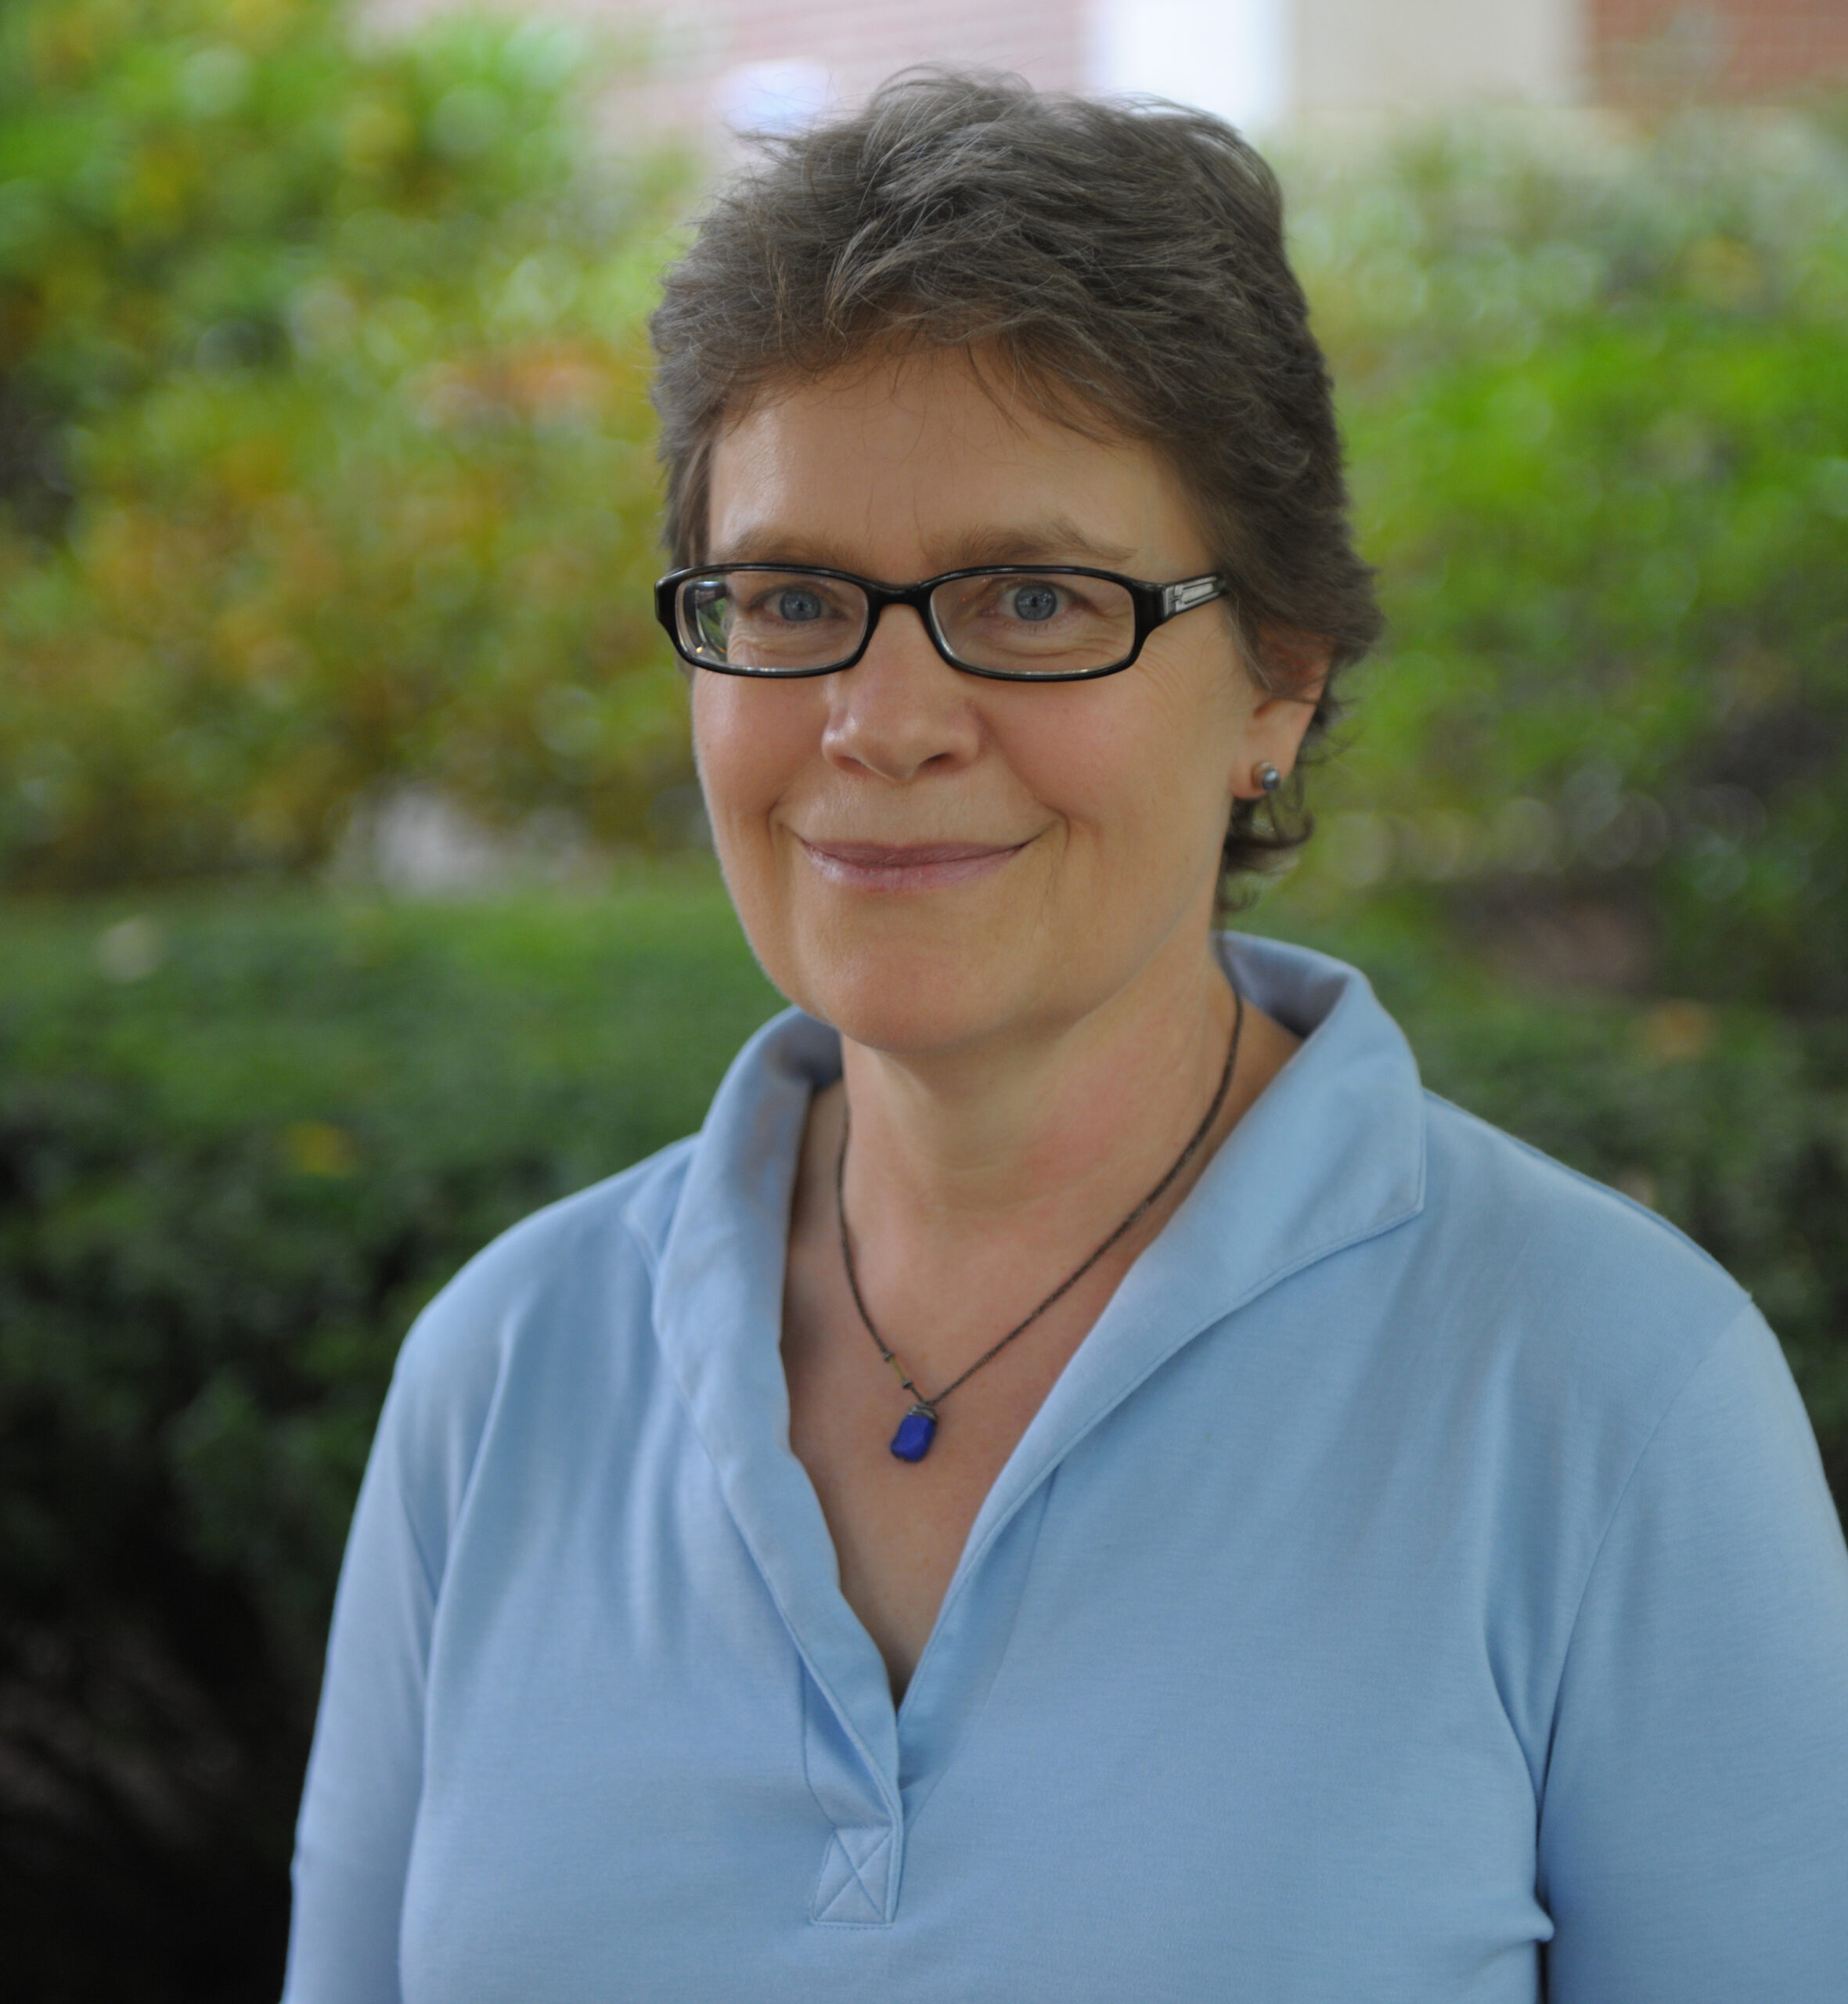 Claire Buck is co-director of the Center for Collaborative Teaching and Learning at Wheaton College in Norton, Massachusetts.